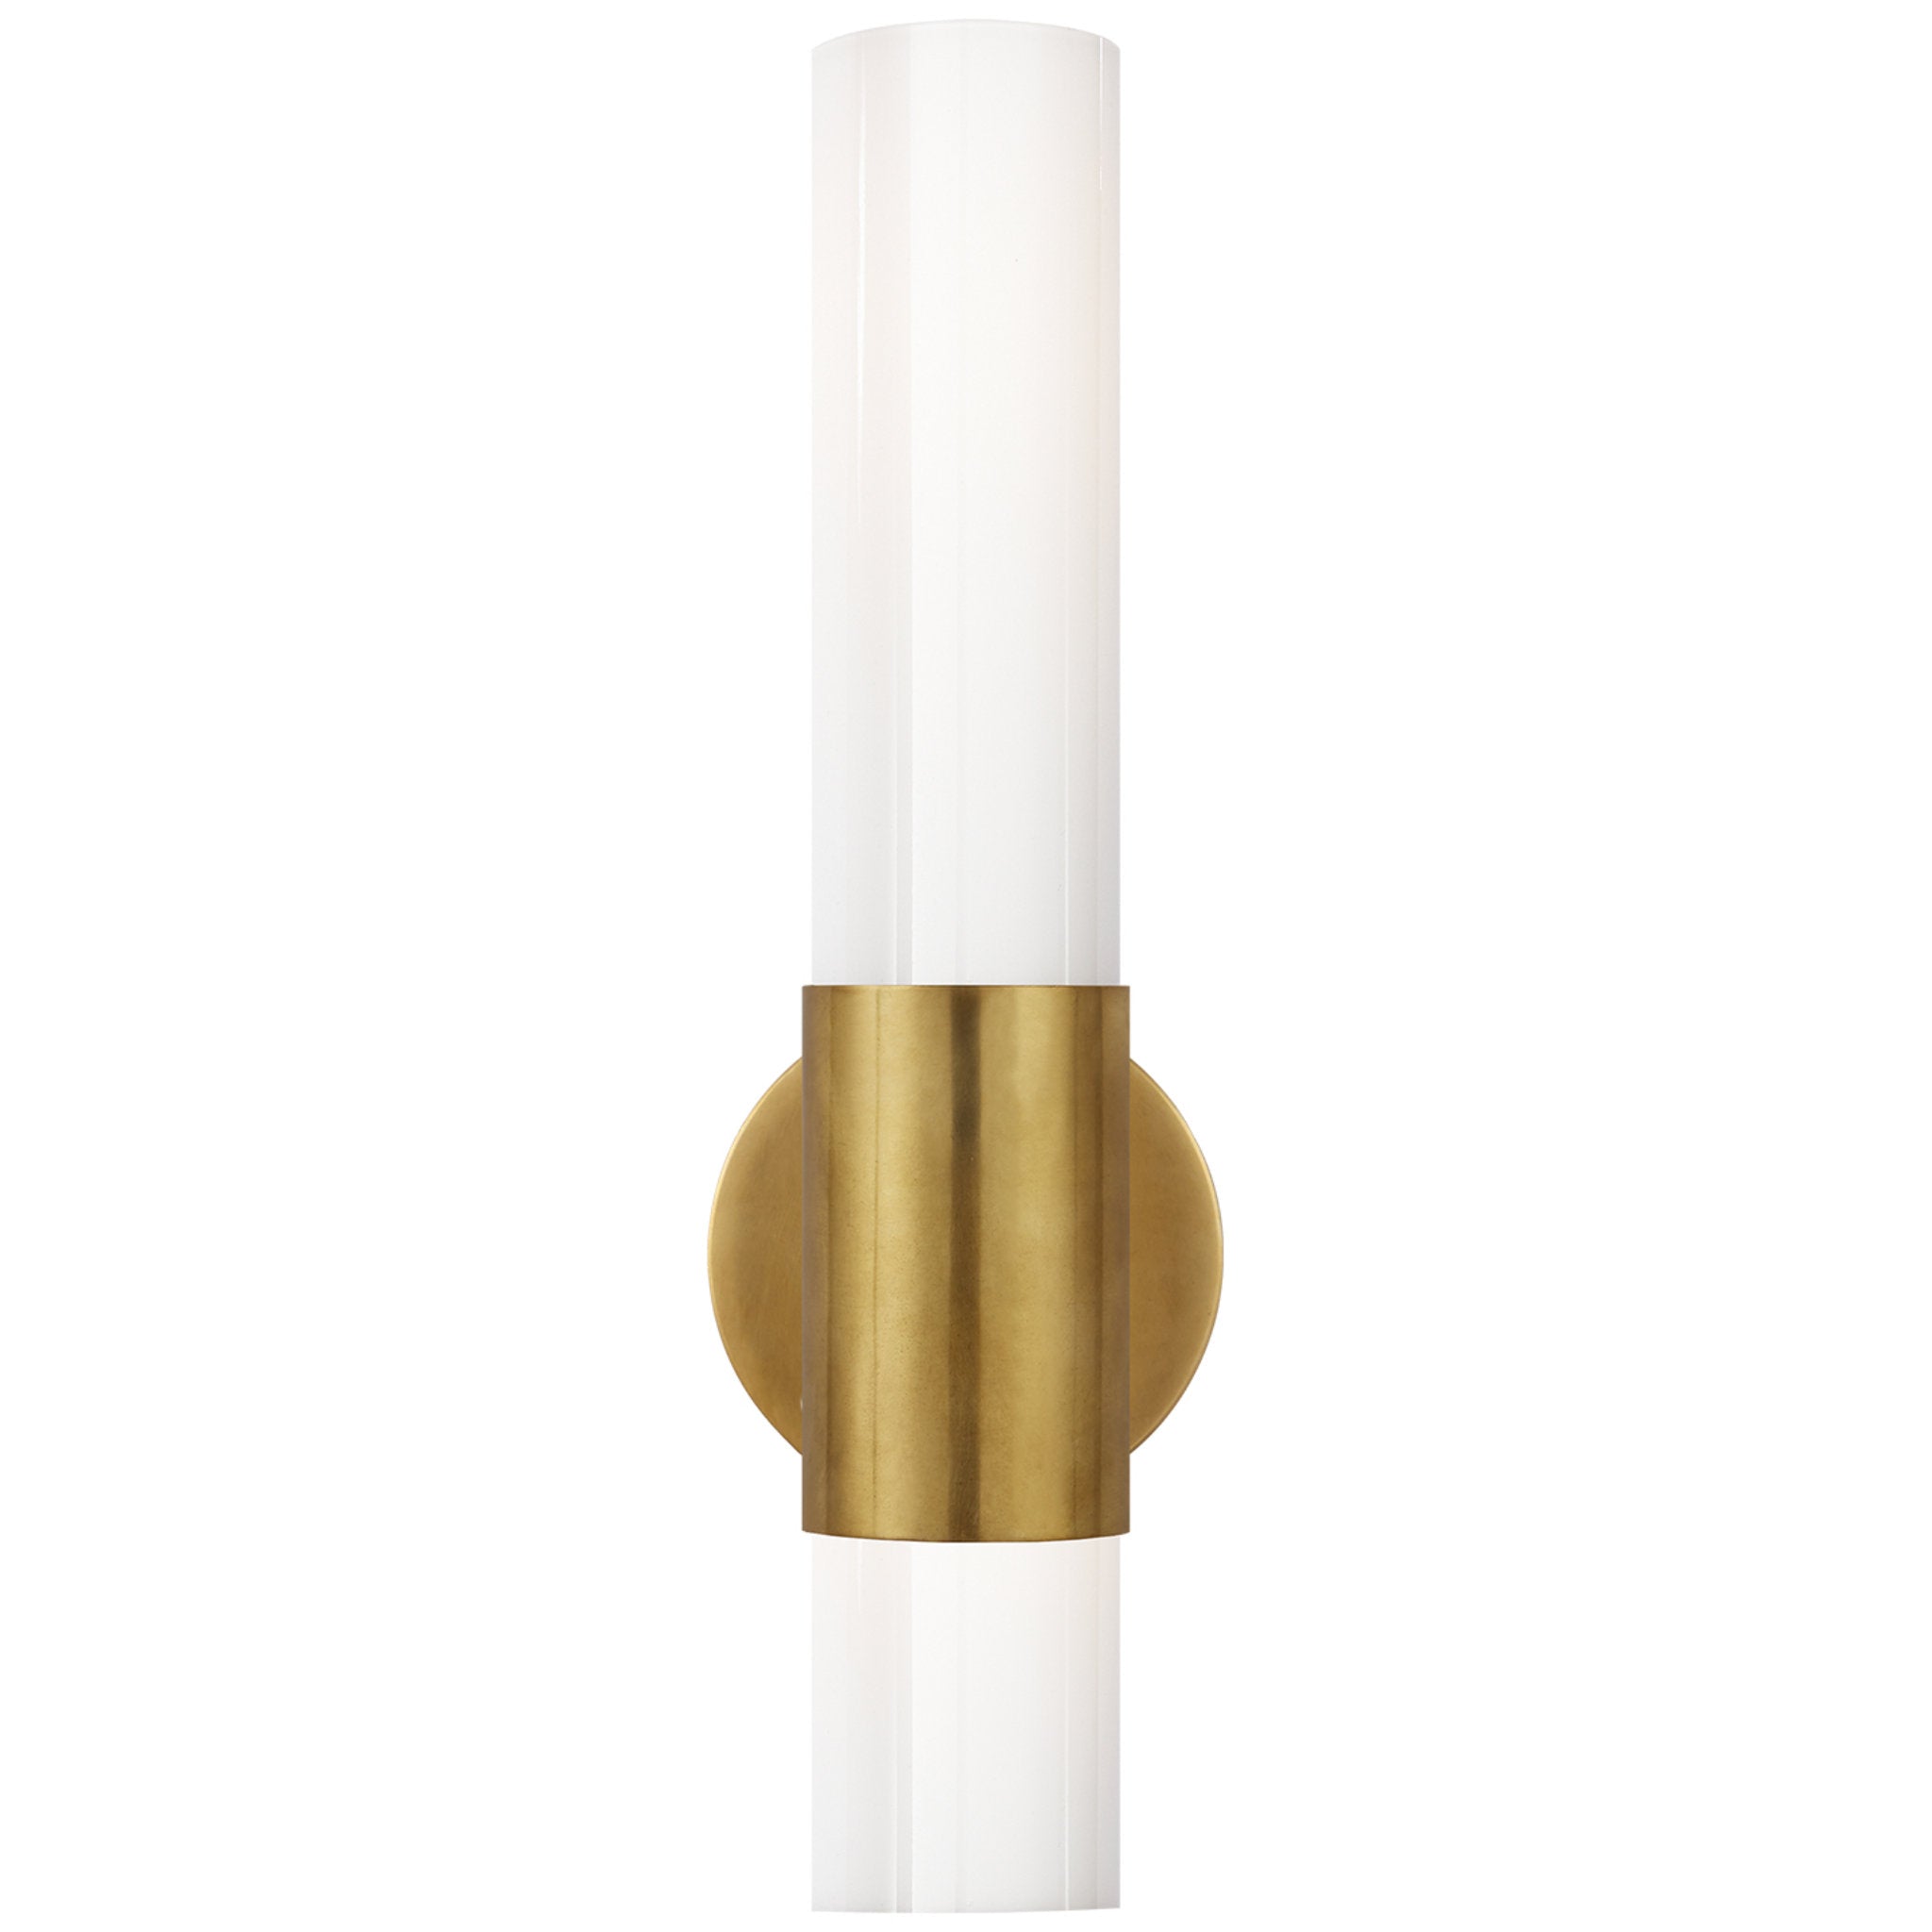 AERIN Penz Medium Cylindrical Sconce in Hand-Rubbed Antique Brass with White Glass